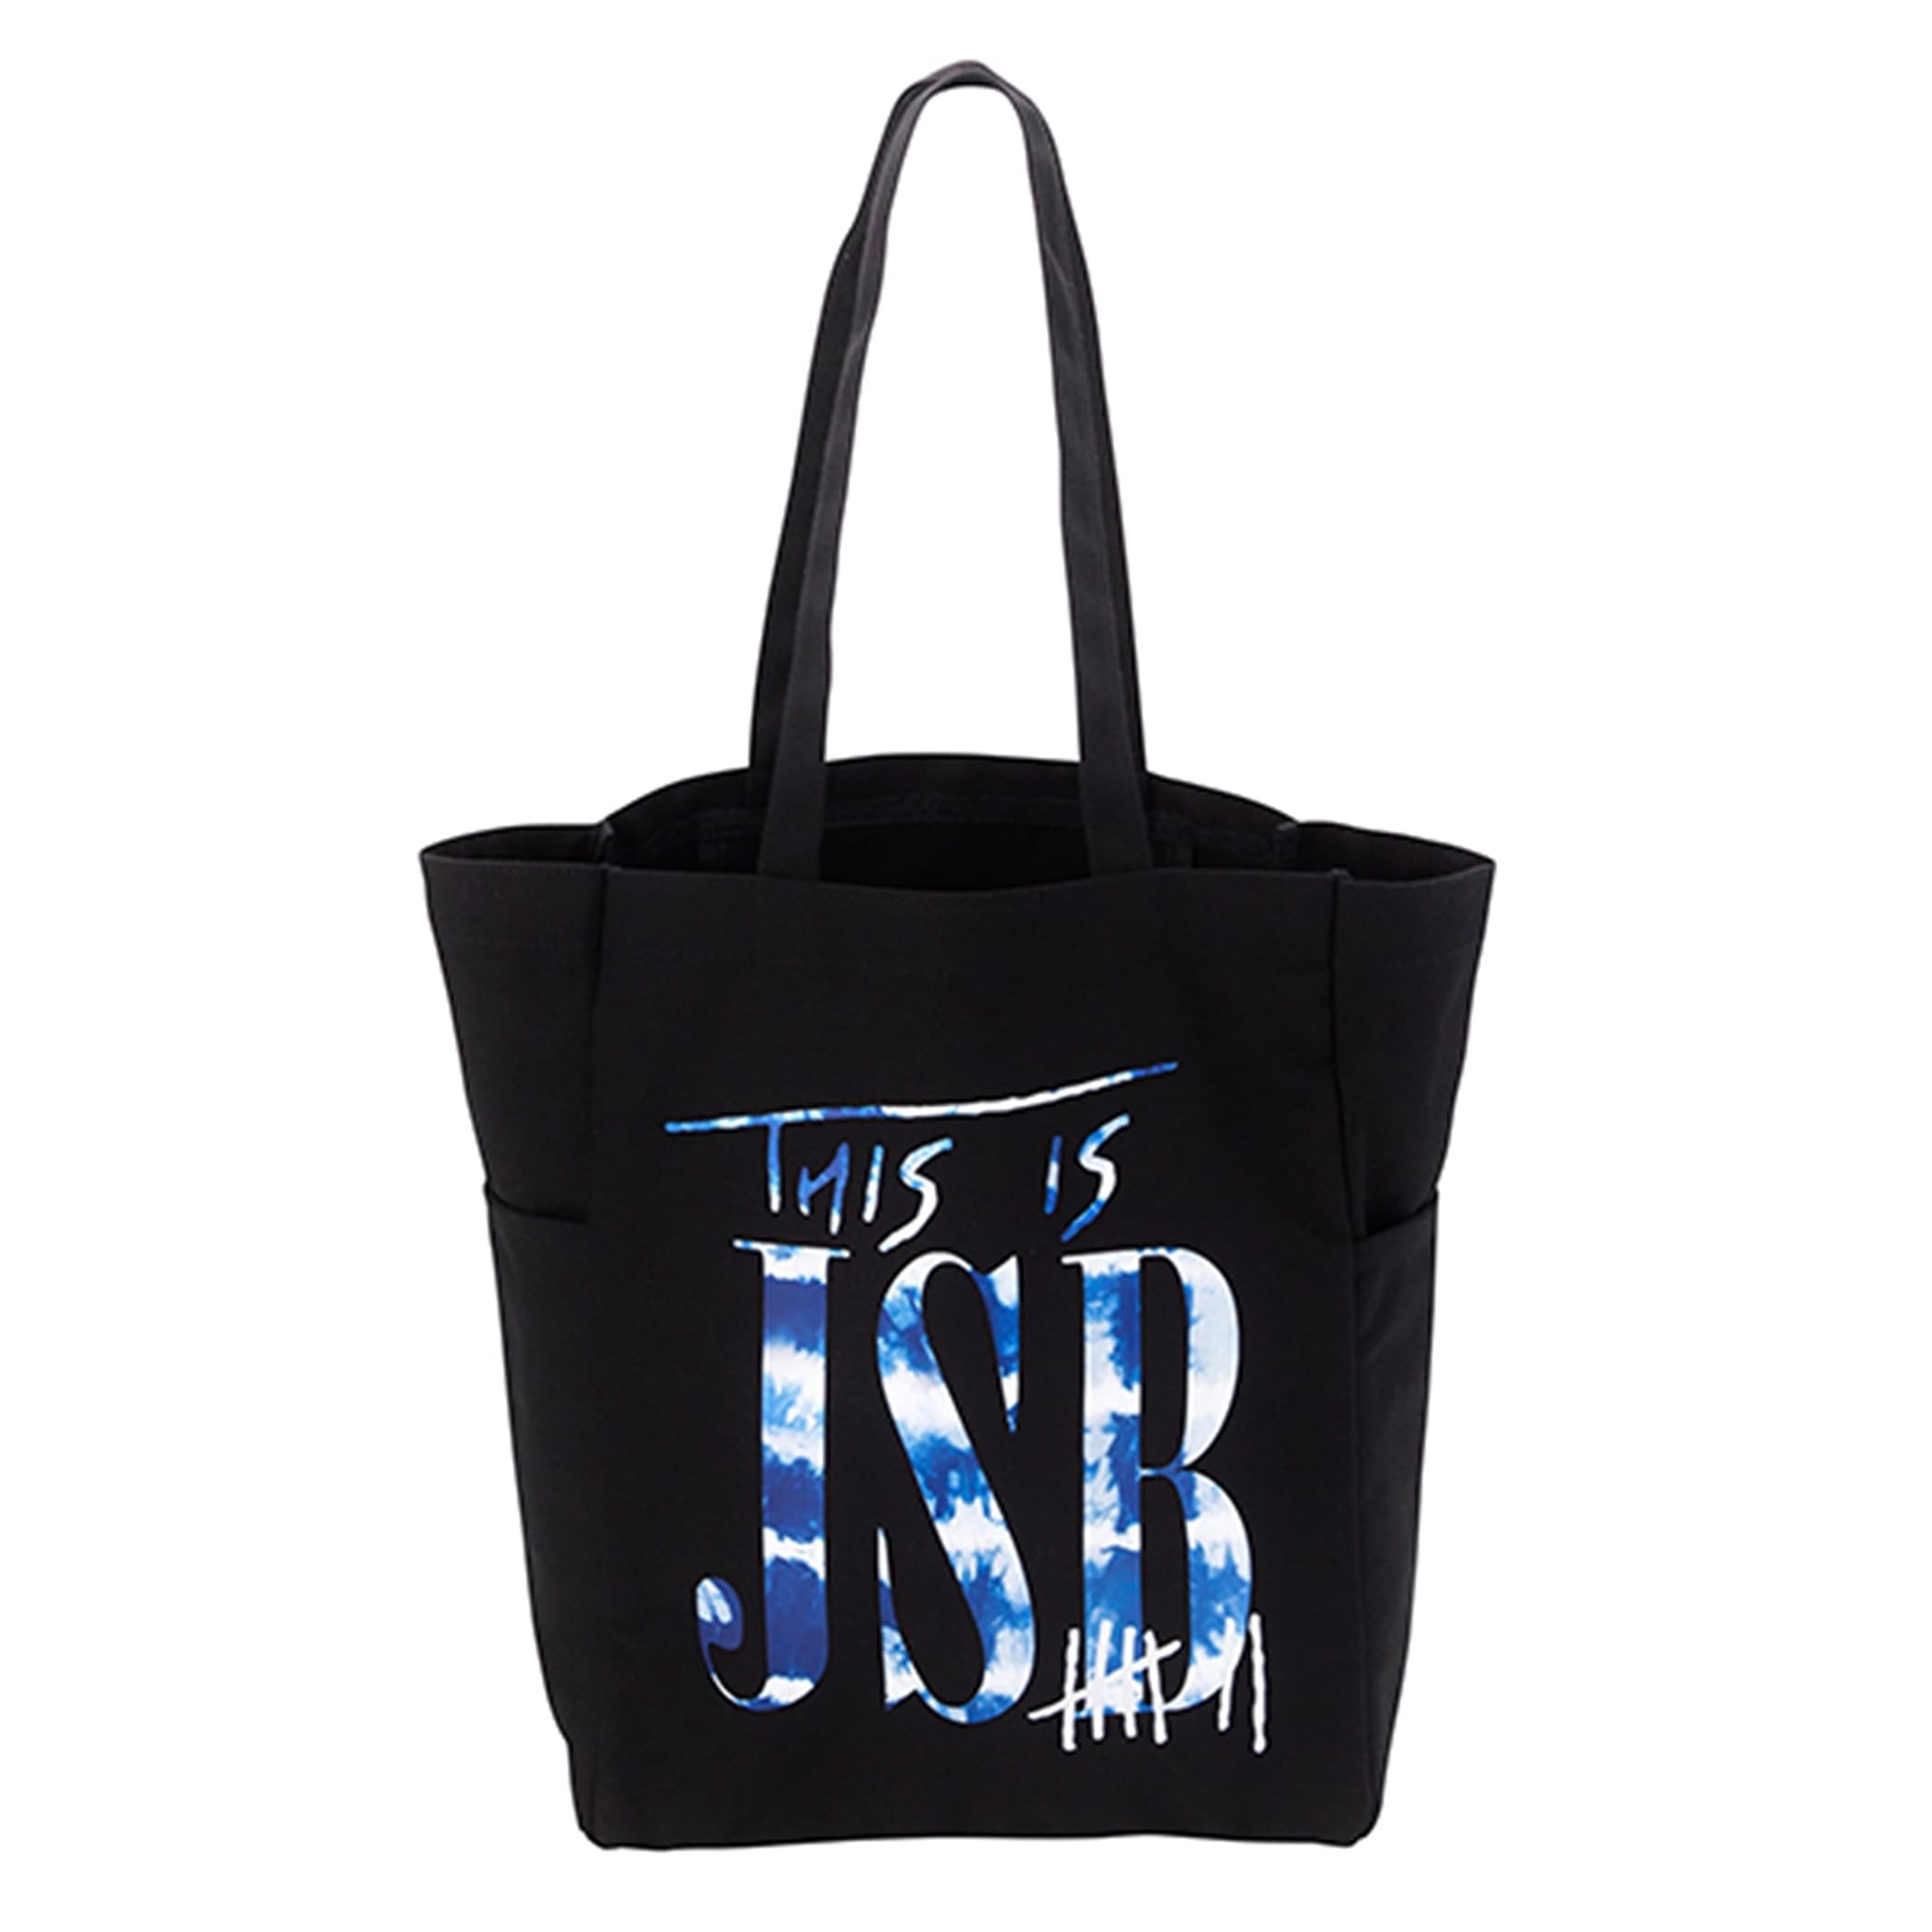 THIS IS JSB トートバッグ